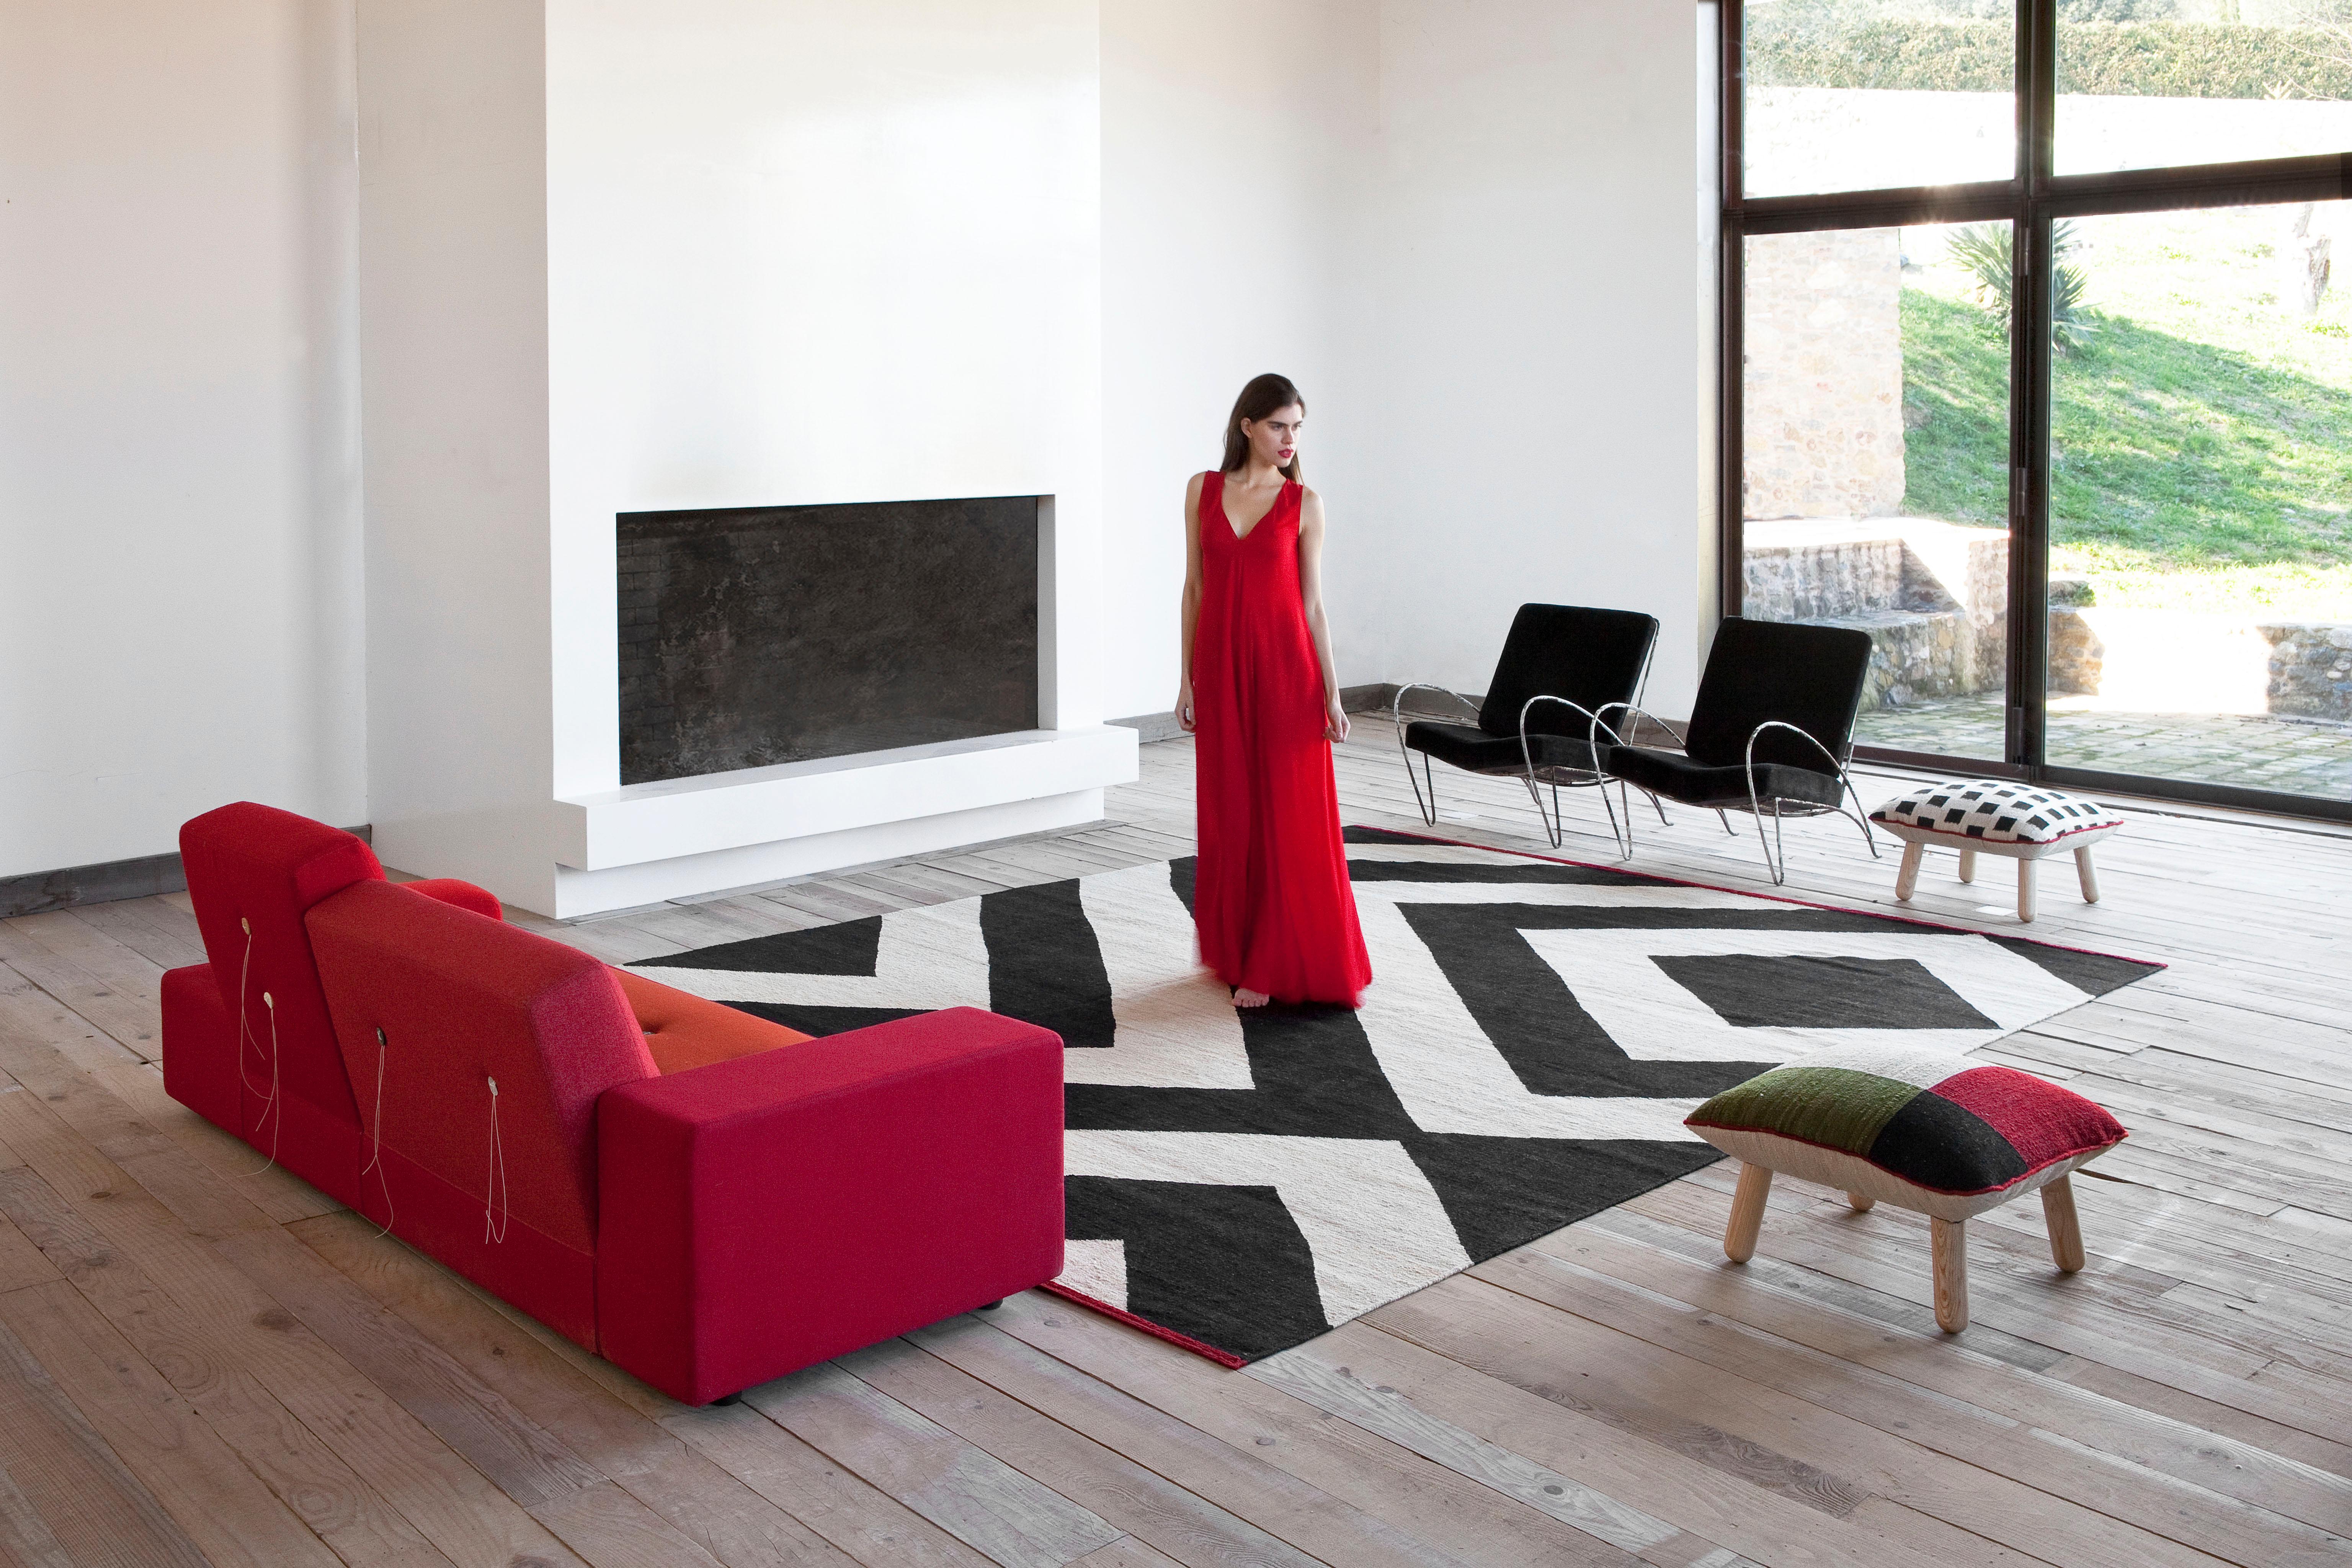 Extra Large 'Mélange Zoom' Hand-Loomed Rug by Sybilla for Nanimarquina.

Executed in 100% hand-loomed Afghan wool. 'Me´lange' is the perfect combination of tradition and modernity, craft and design, past and future. Its simplification of classic